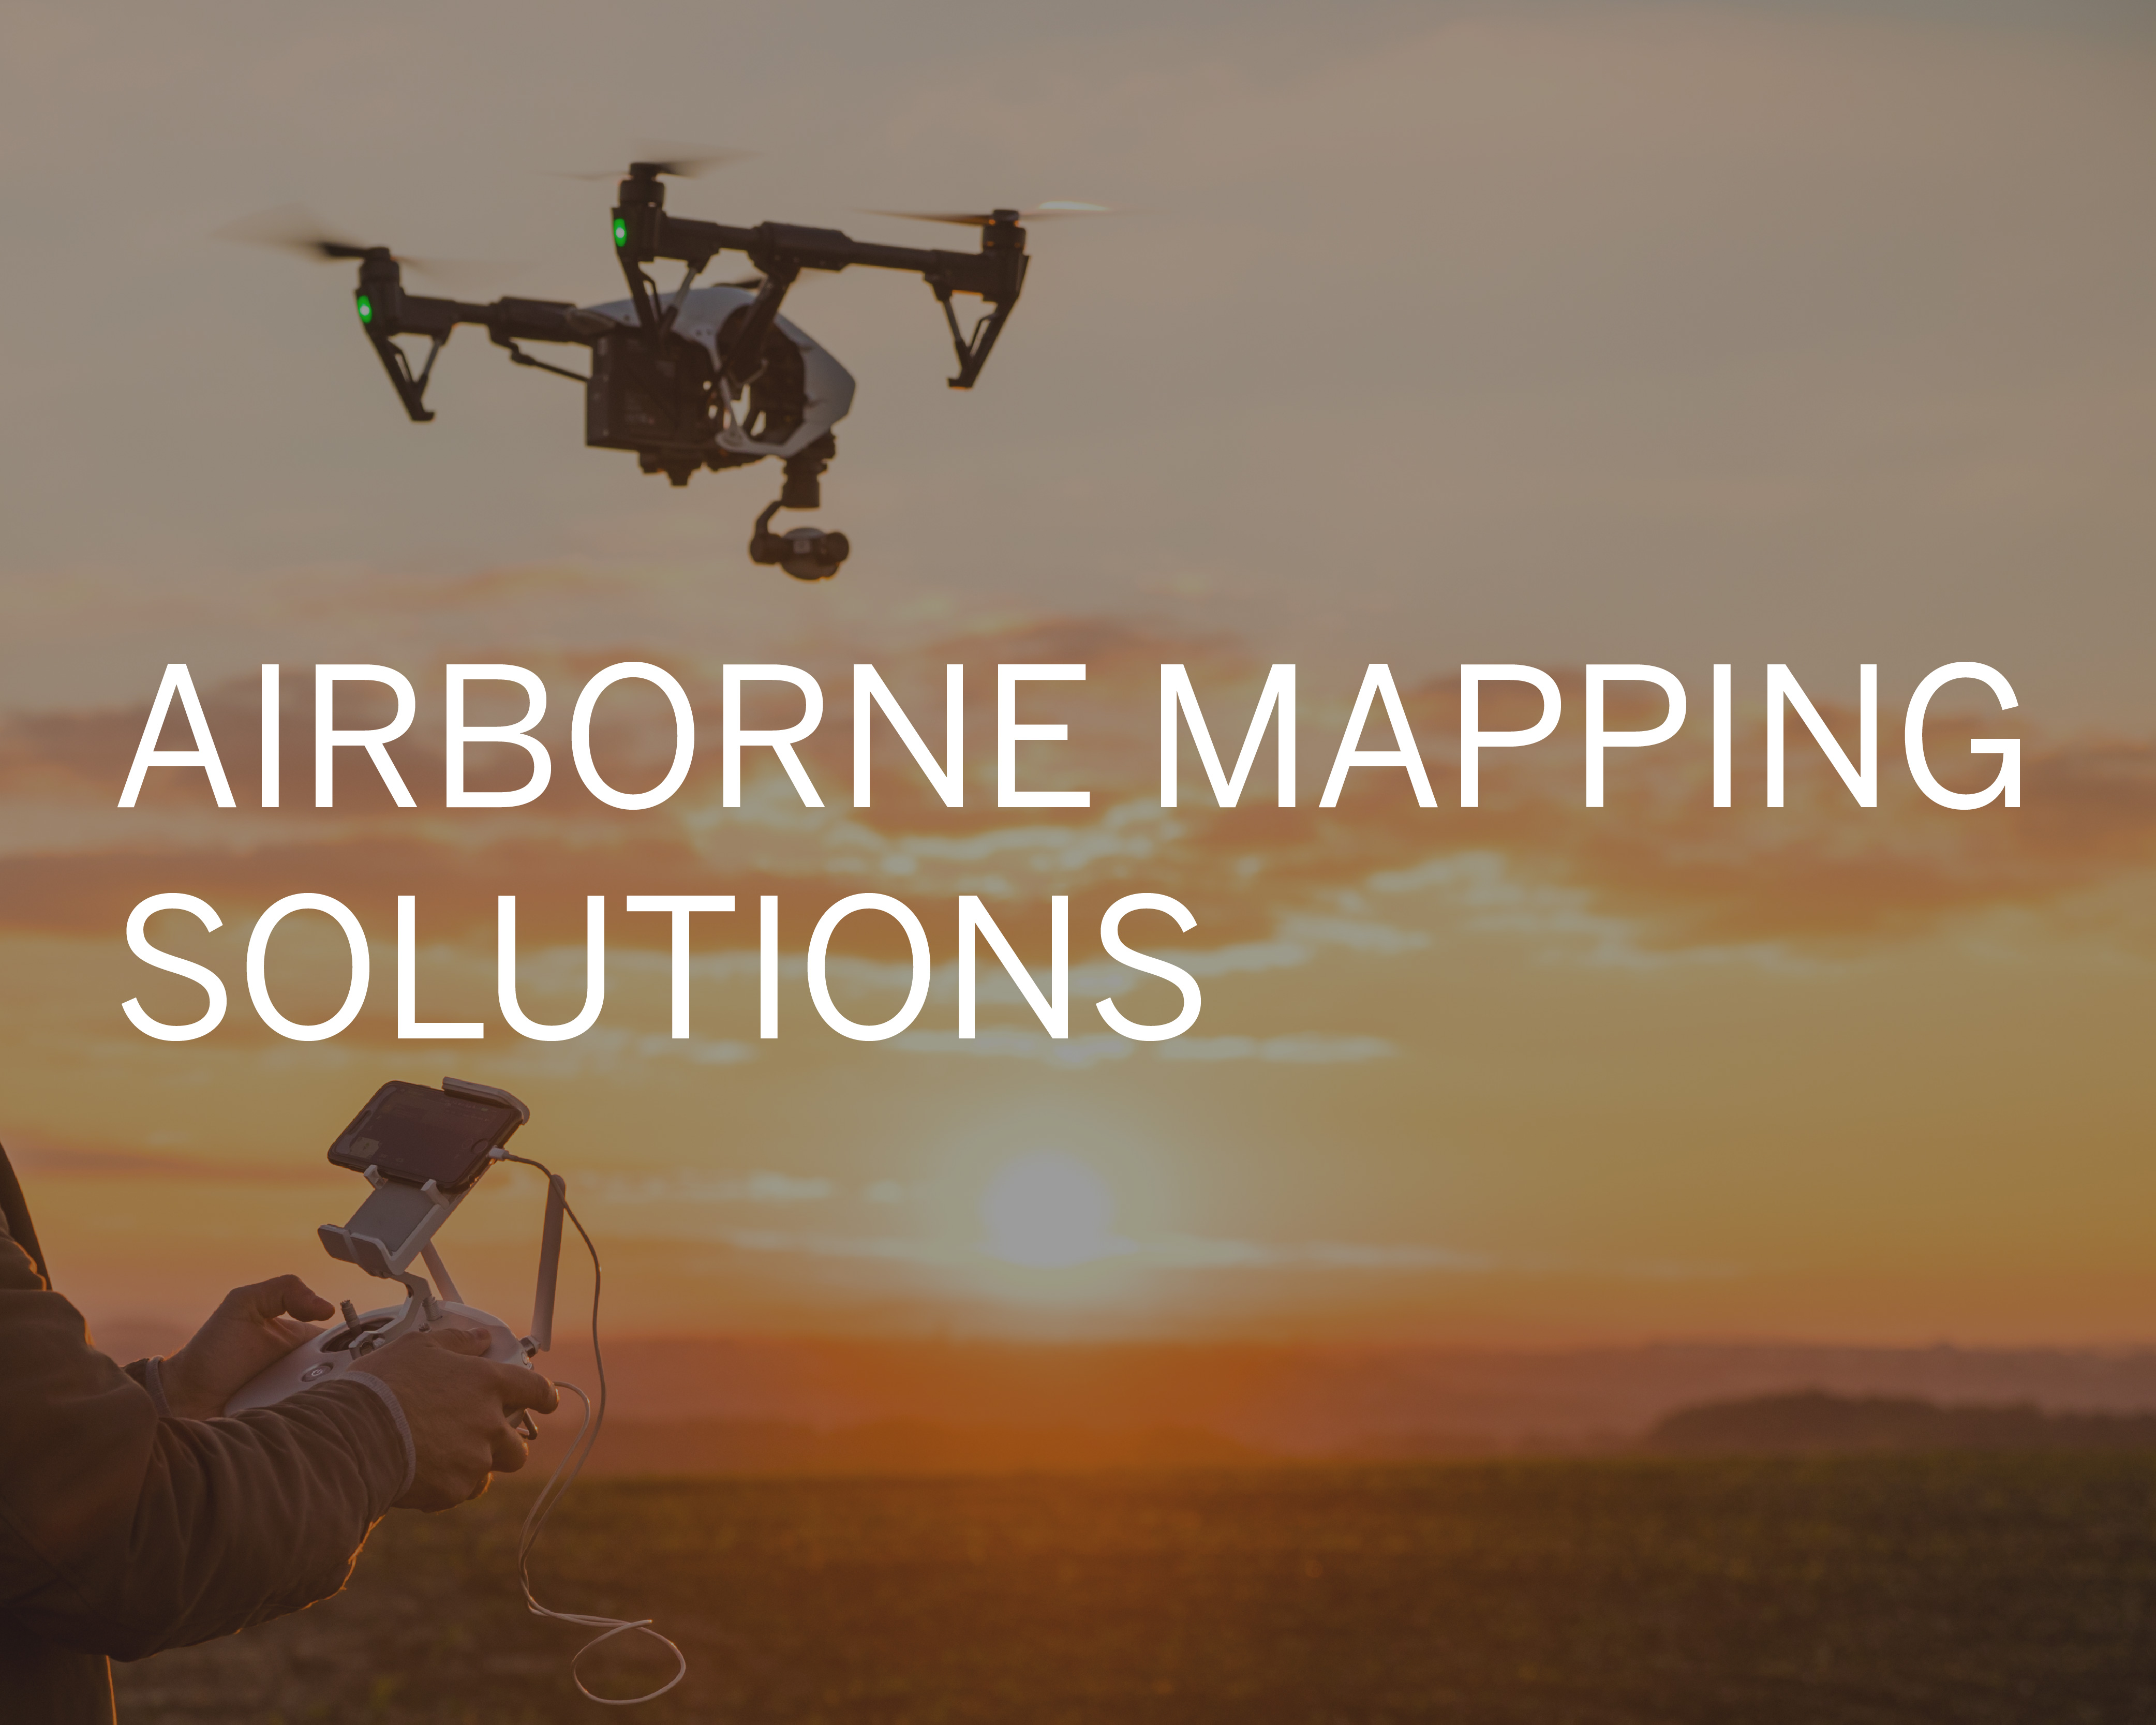 Aiborne Mapping Solutions